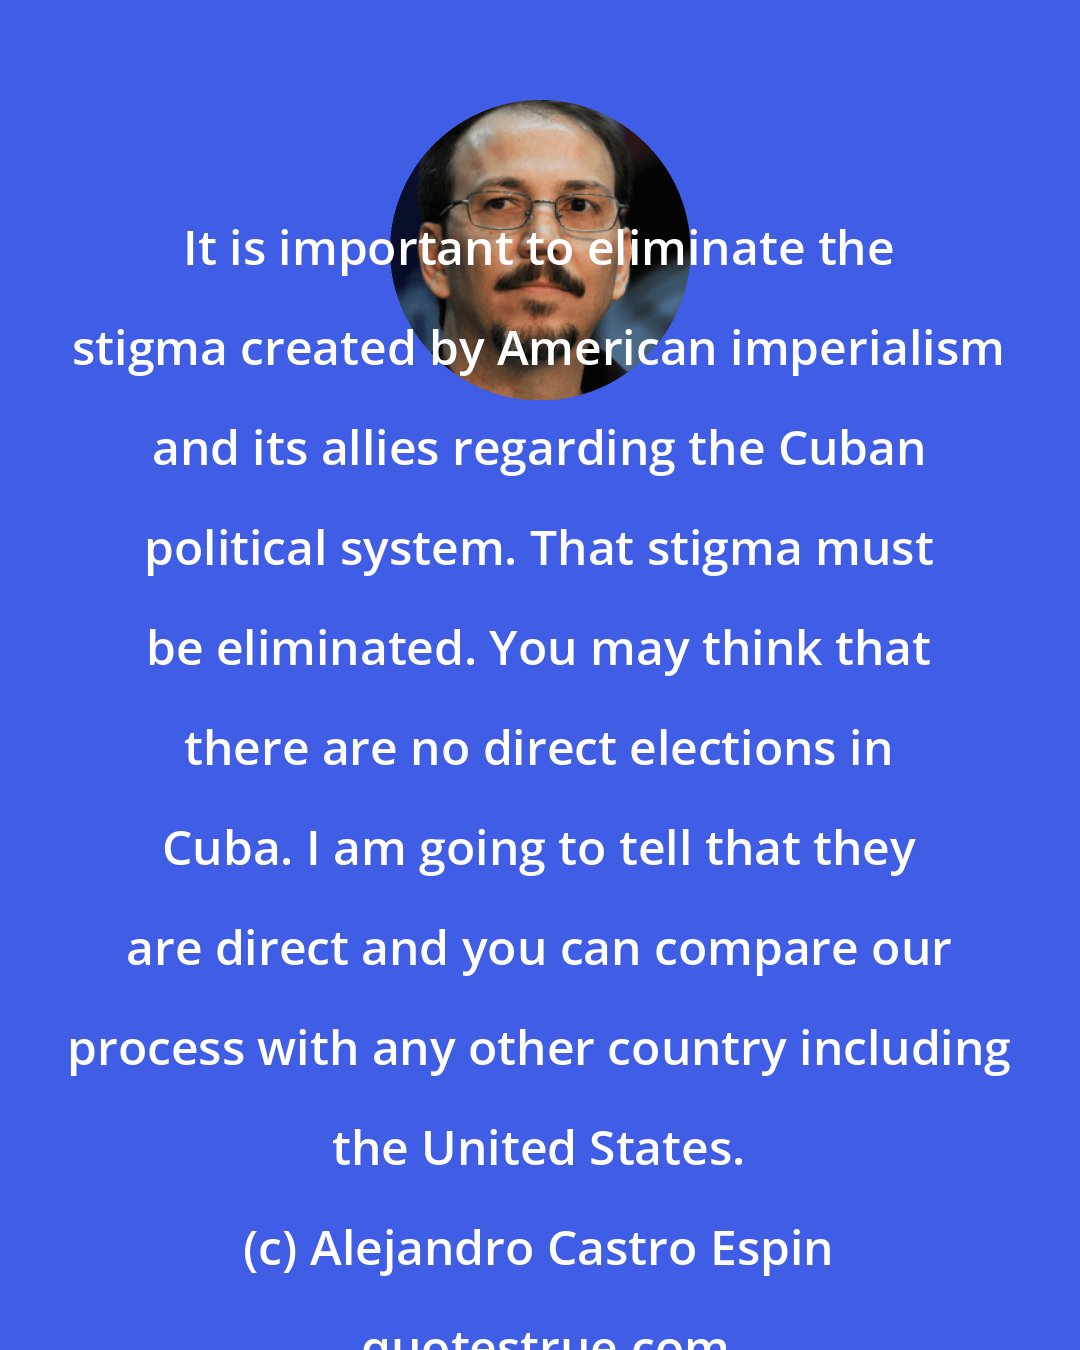 Alejandro Castro Espin: It is important to eliminate the stigma created by American imperialism and its allies regarding the Cuban political system. That stigma must be eliminated. You may think that there are no direct elections in Cuba. I am going to tell that they are direct and you can compare our process with any other country including the United States.